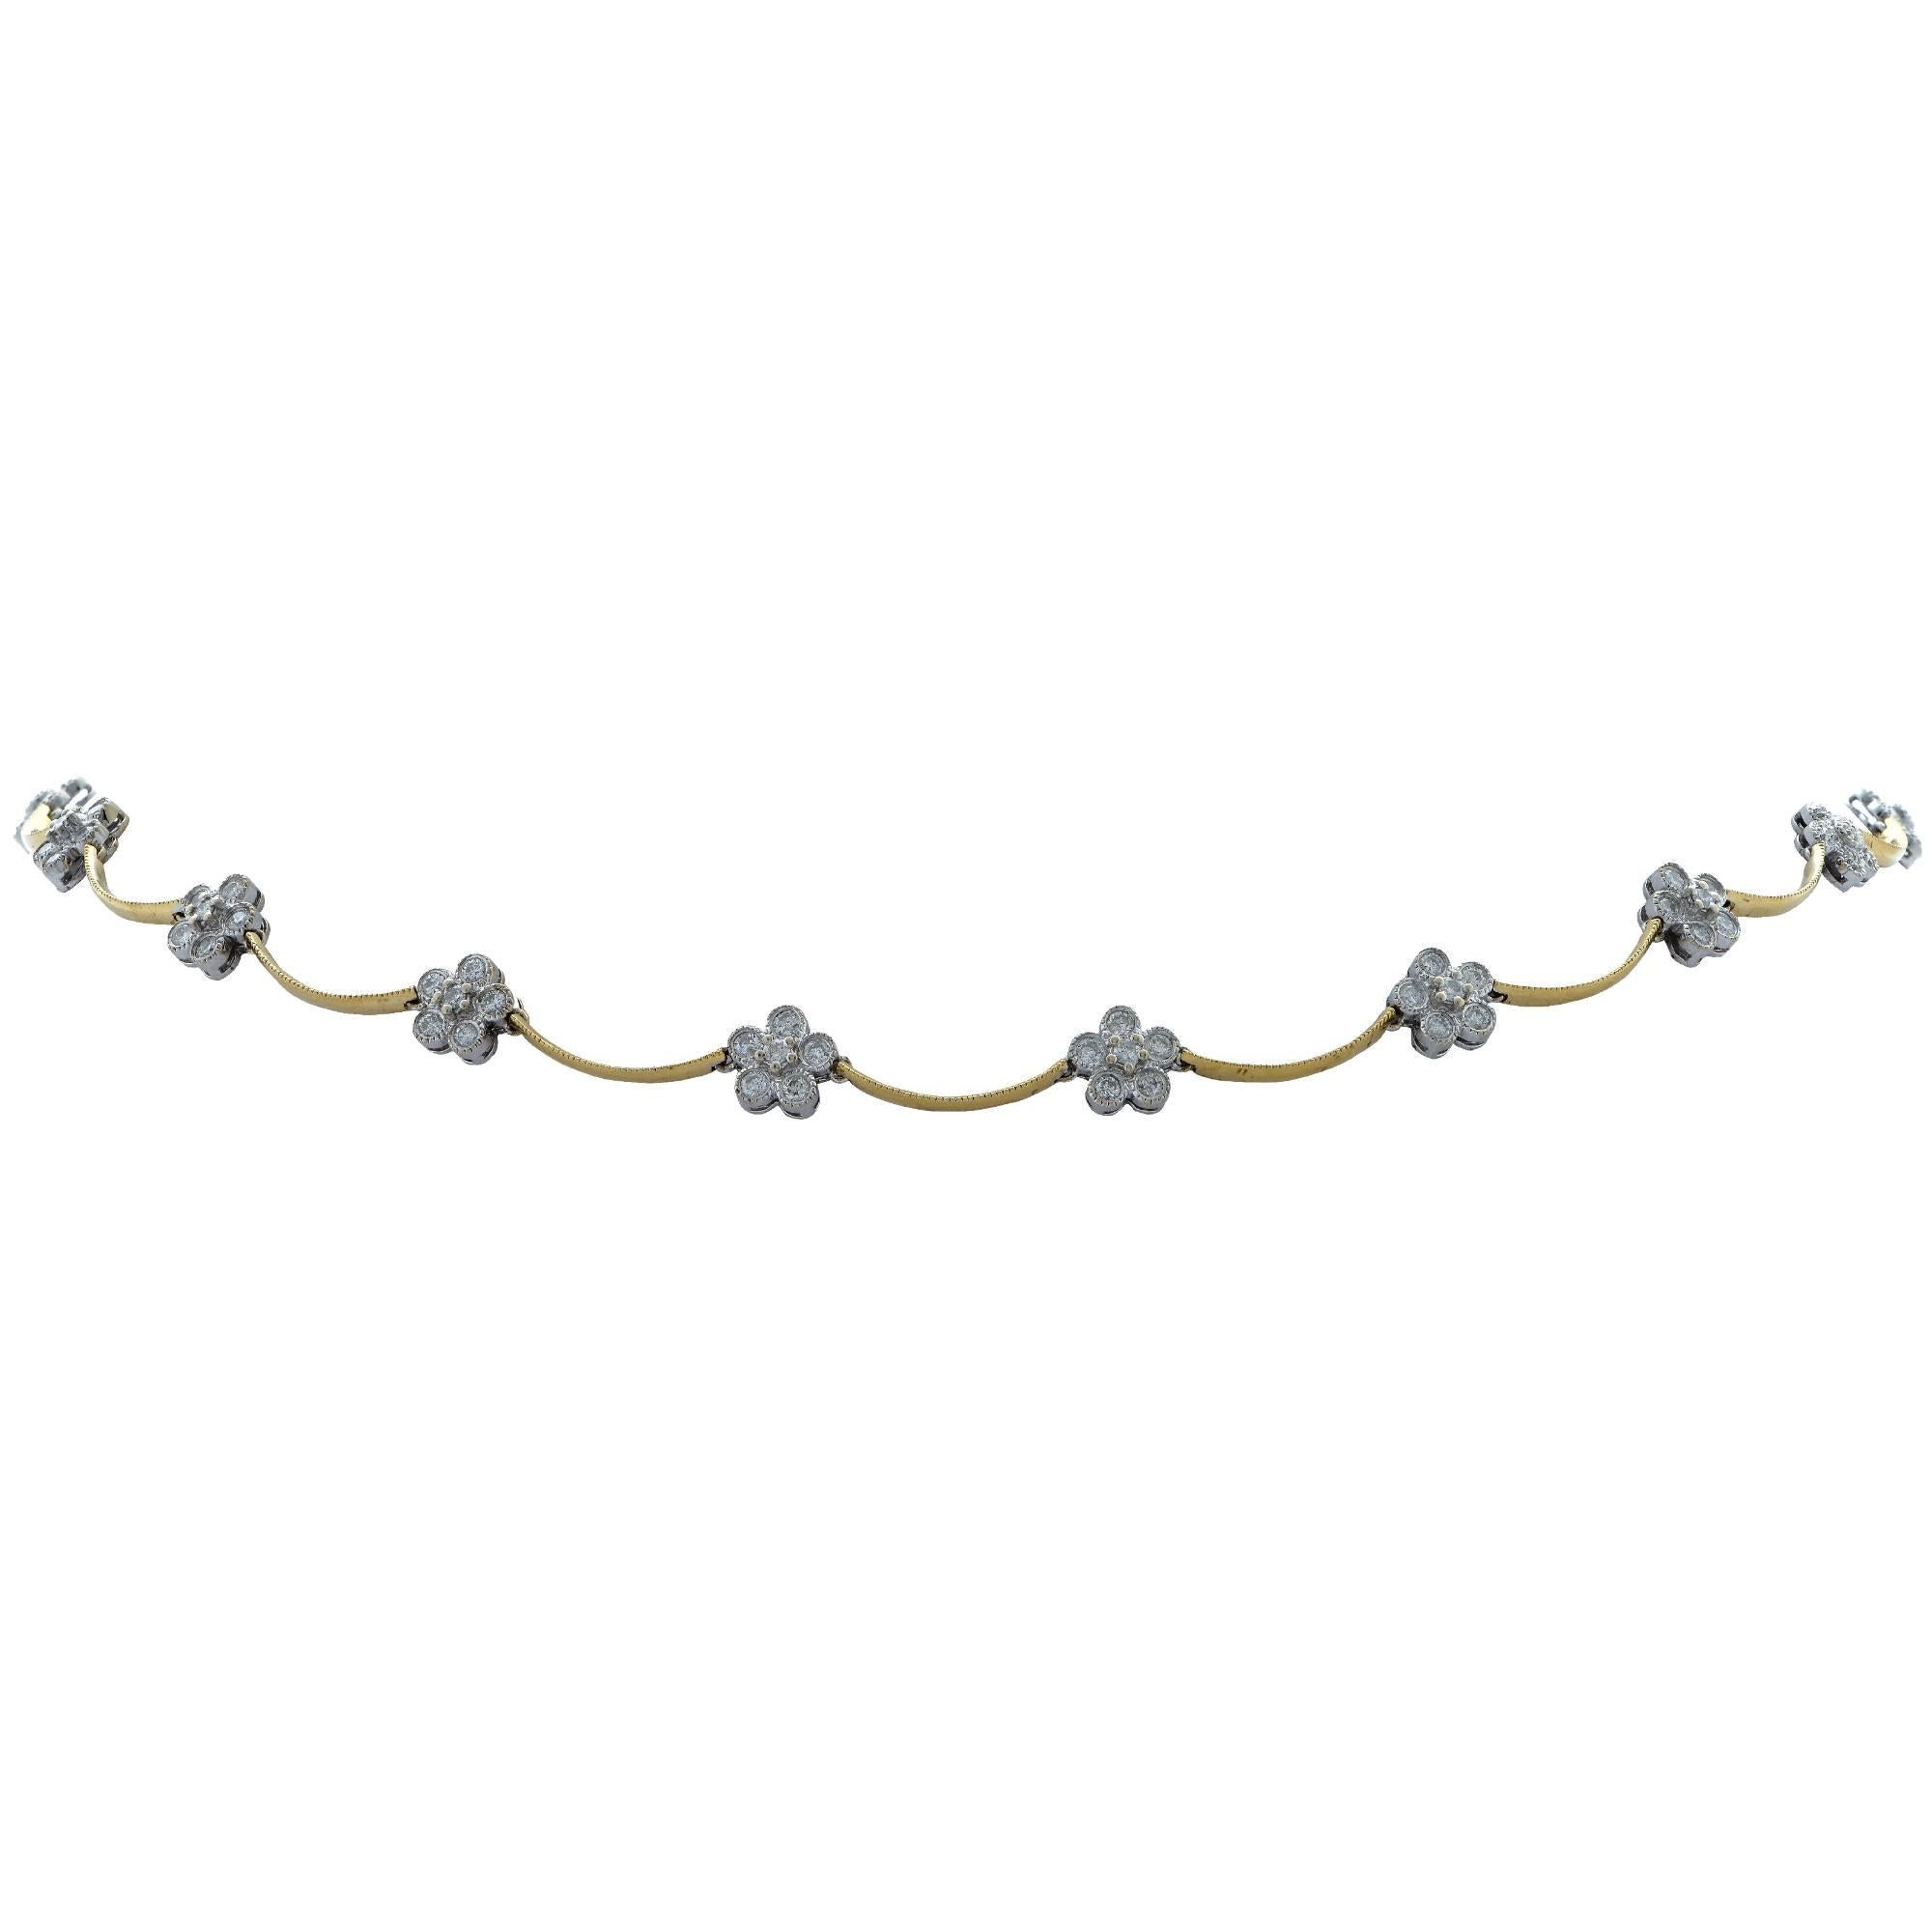 14k white and yellow gold necklace featuring 42 round brilliant cut diamonds H color I1 clarity.

Measurements are available upon request.
It is stamped and/or tested as 14k gold.
The metal weight is 18.66 grams.

Our pieces are all accompanied by